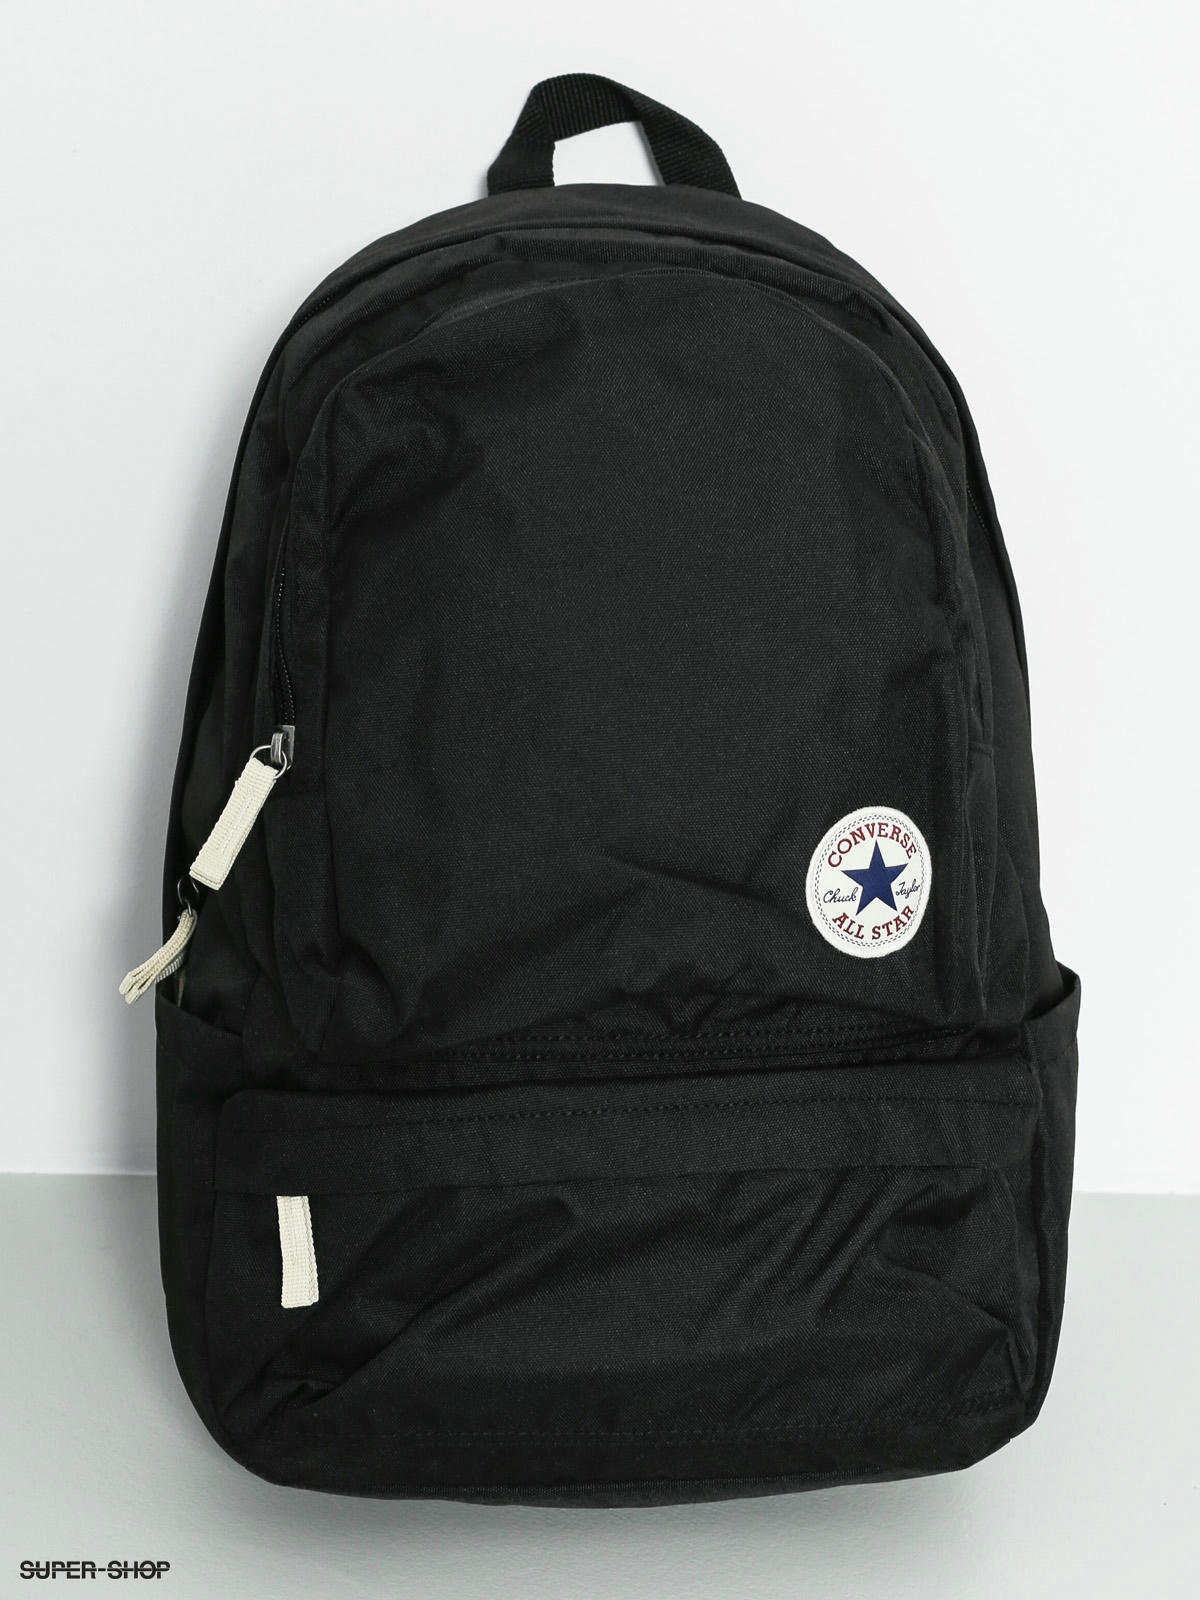 converse chuck plus backpack